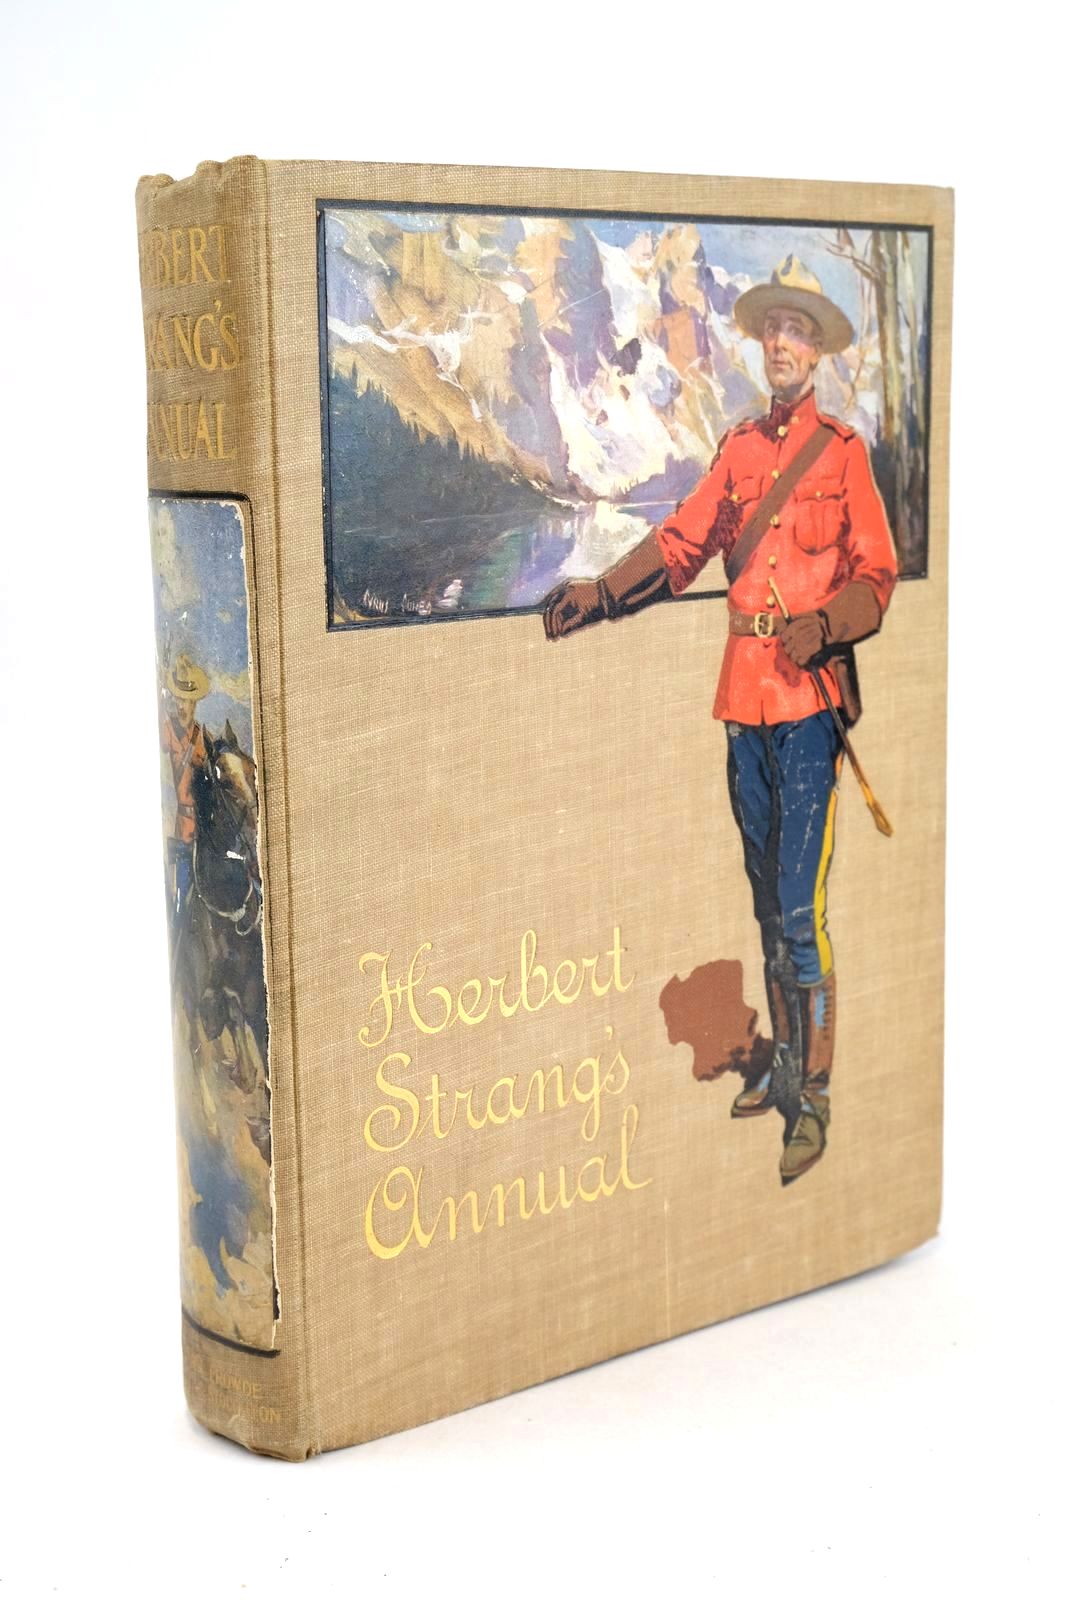 Photo of HERBERT STRANG'S ANNUAL 1913 written by Strang, Herbert Beresford, Leslie Gilson, Captain Charles Rhoades, Walter C. et al, illustrated by Cuneo, Cyrus Robinson, T.H. Brock, C.E. et al., published by Hodder &amp; Stoughton, Henry Frowde (STOCK CODE: 1325849)  for sale by Stella & Rose's Books